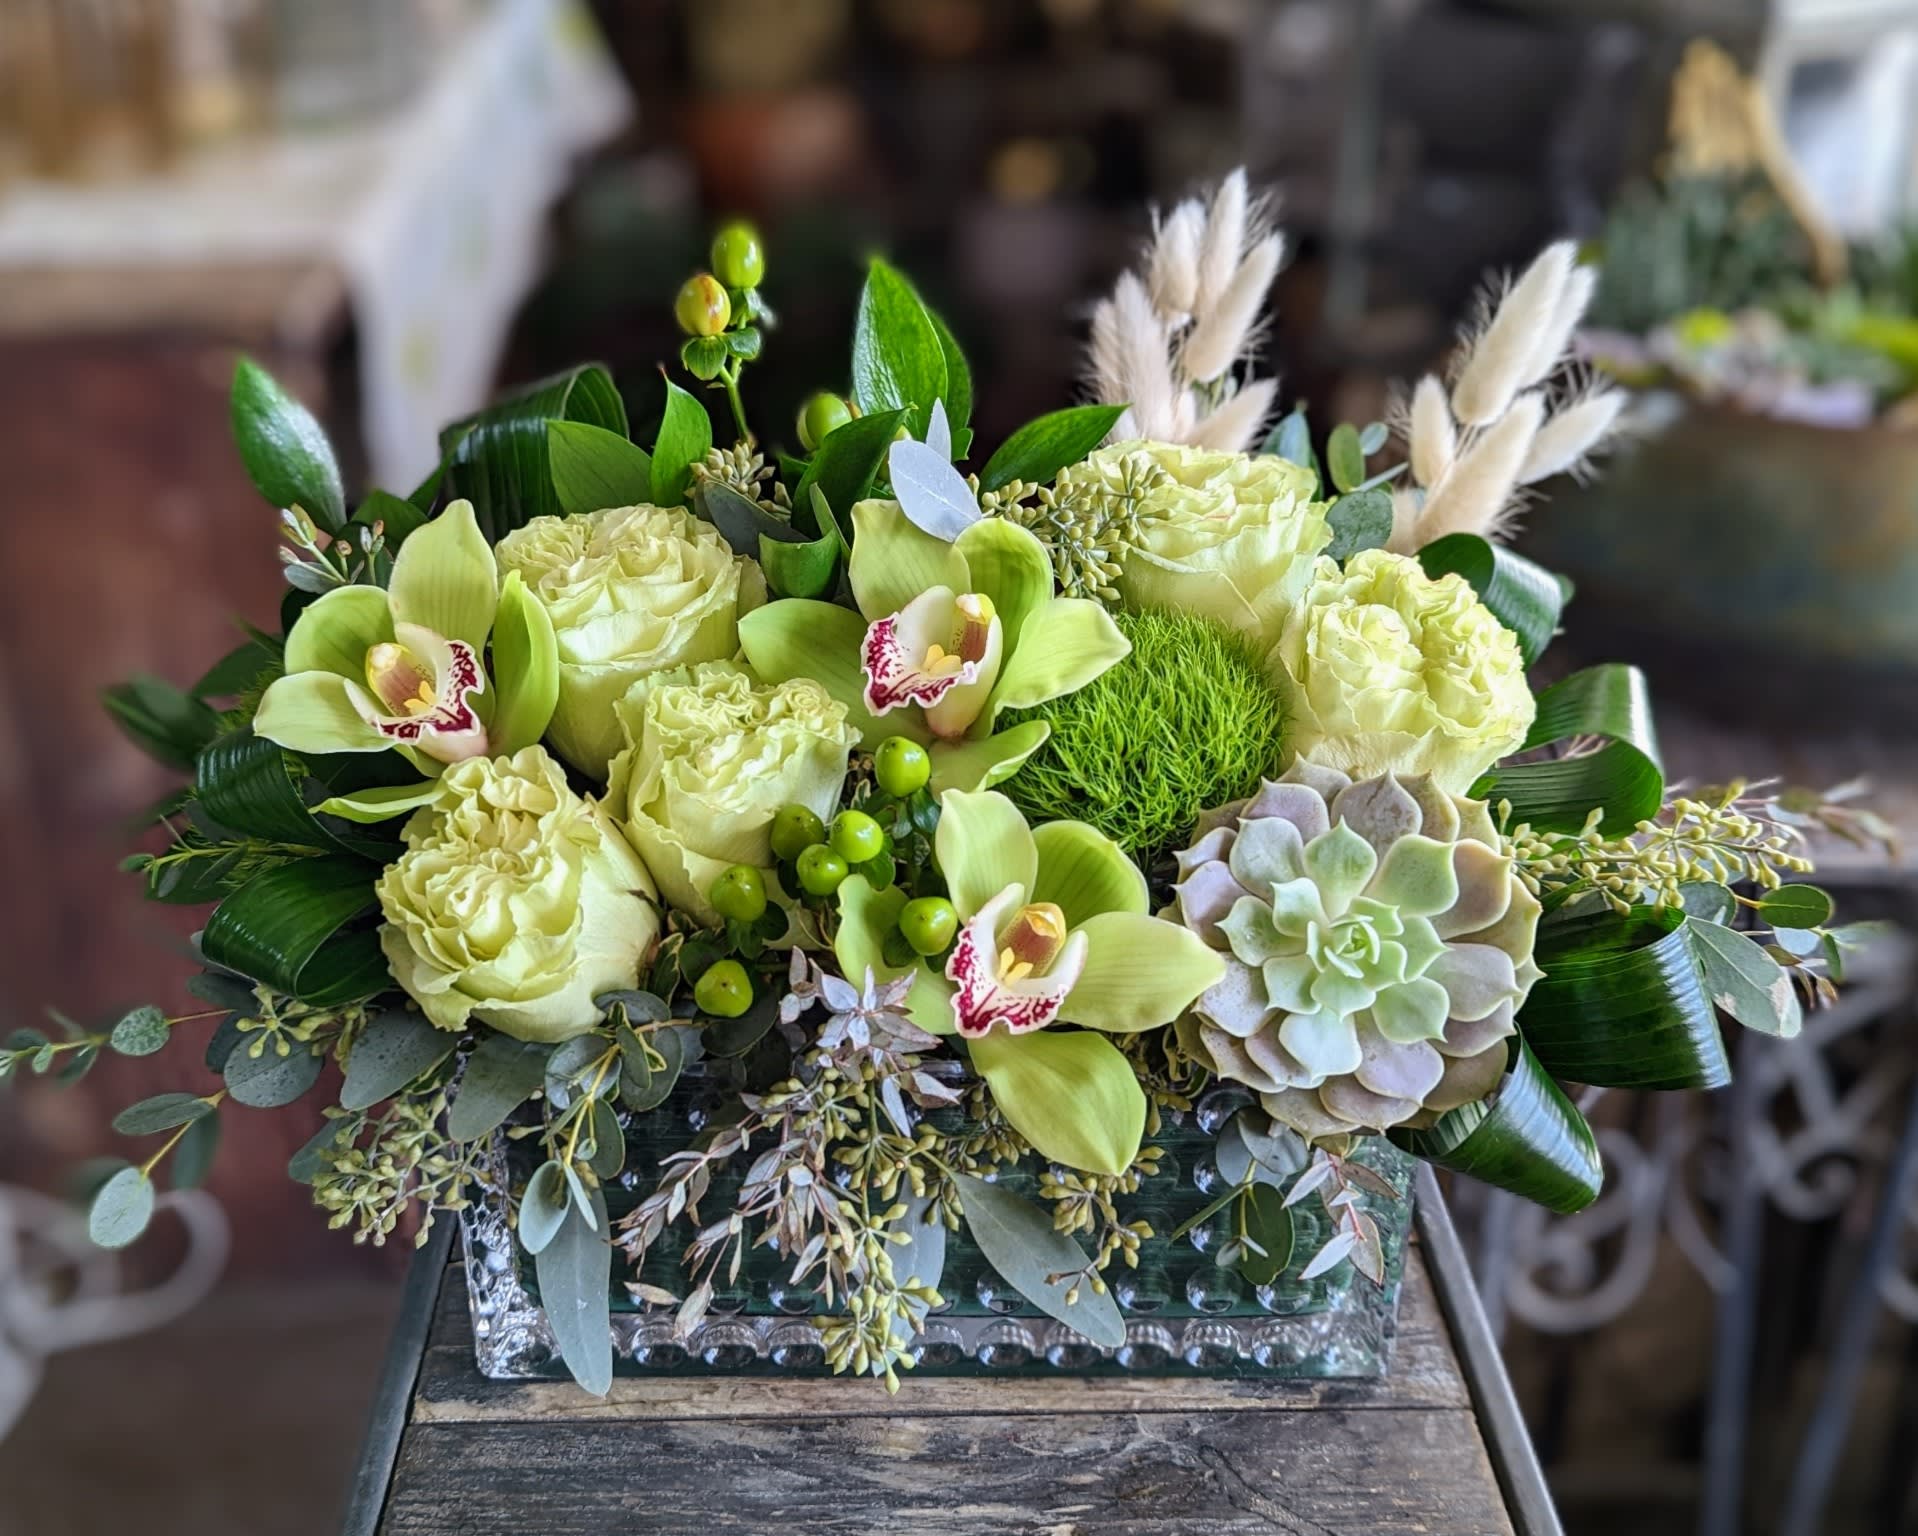 Chartreuse - Roses, orchids, green trick, a succulent, and mixed foliage in shades of green in a glass rectangular vessel.